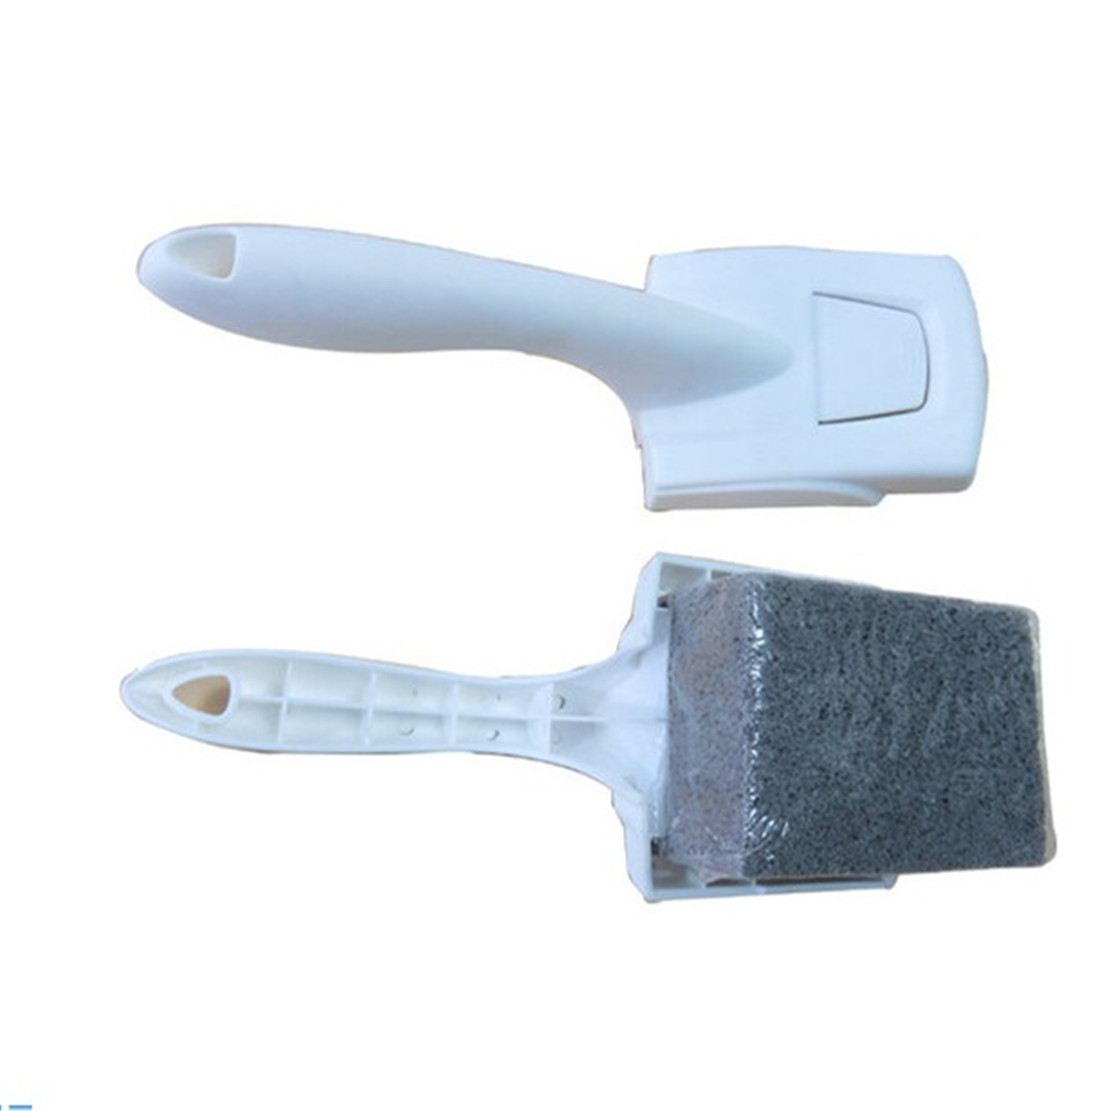 GrillStone Grill Cleaner with handle and cleaning stone